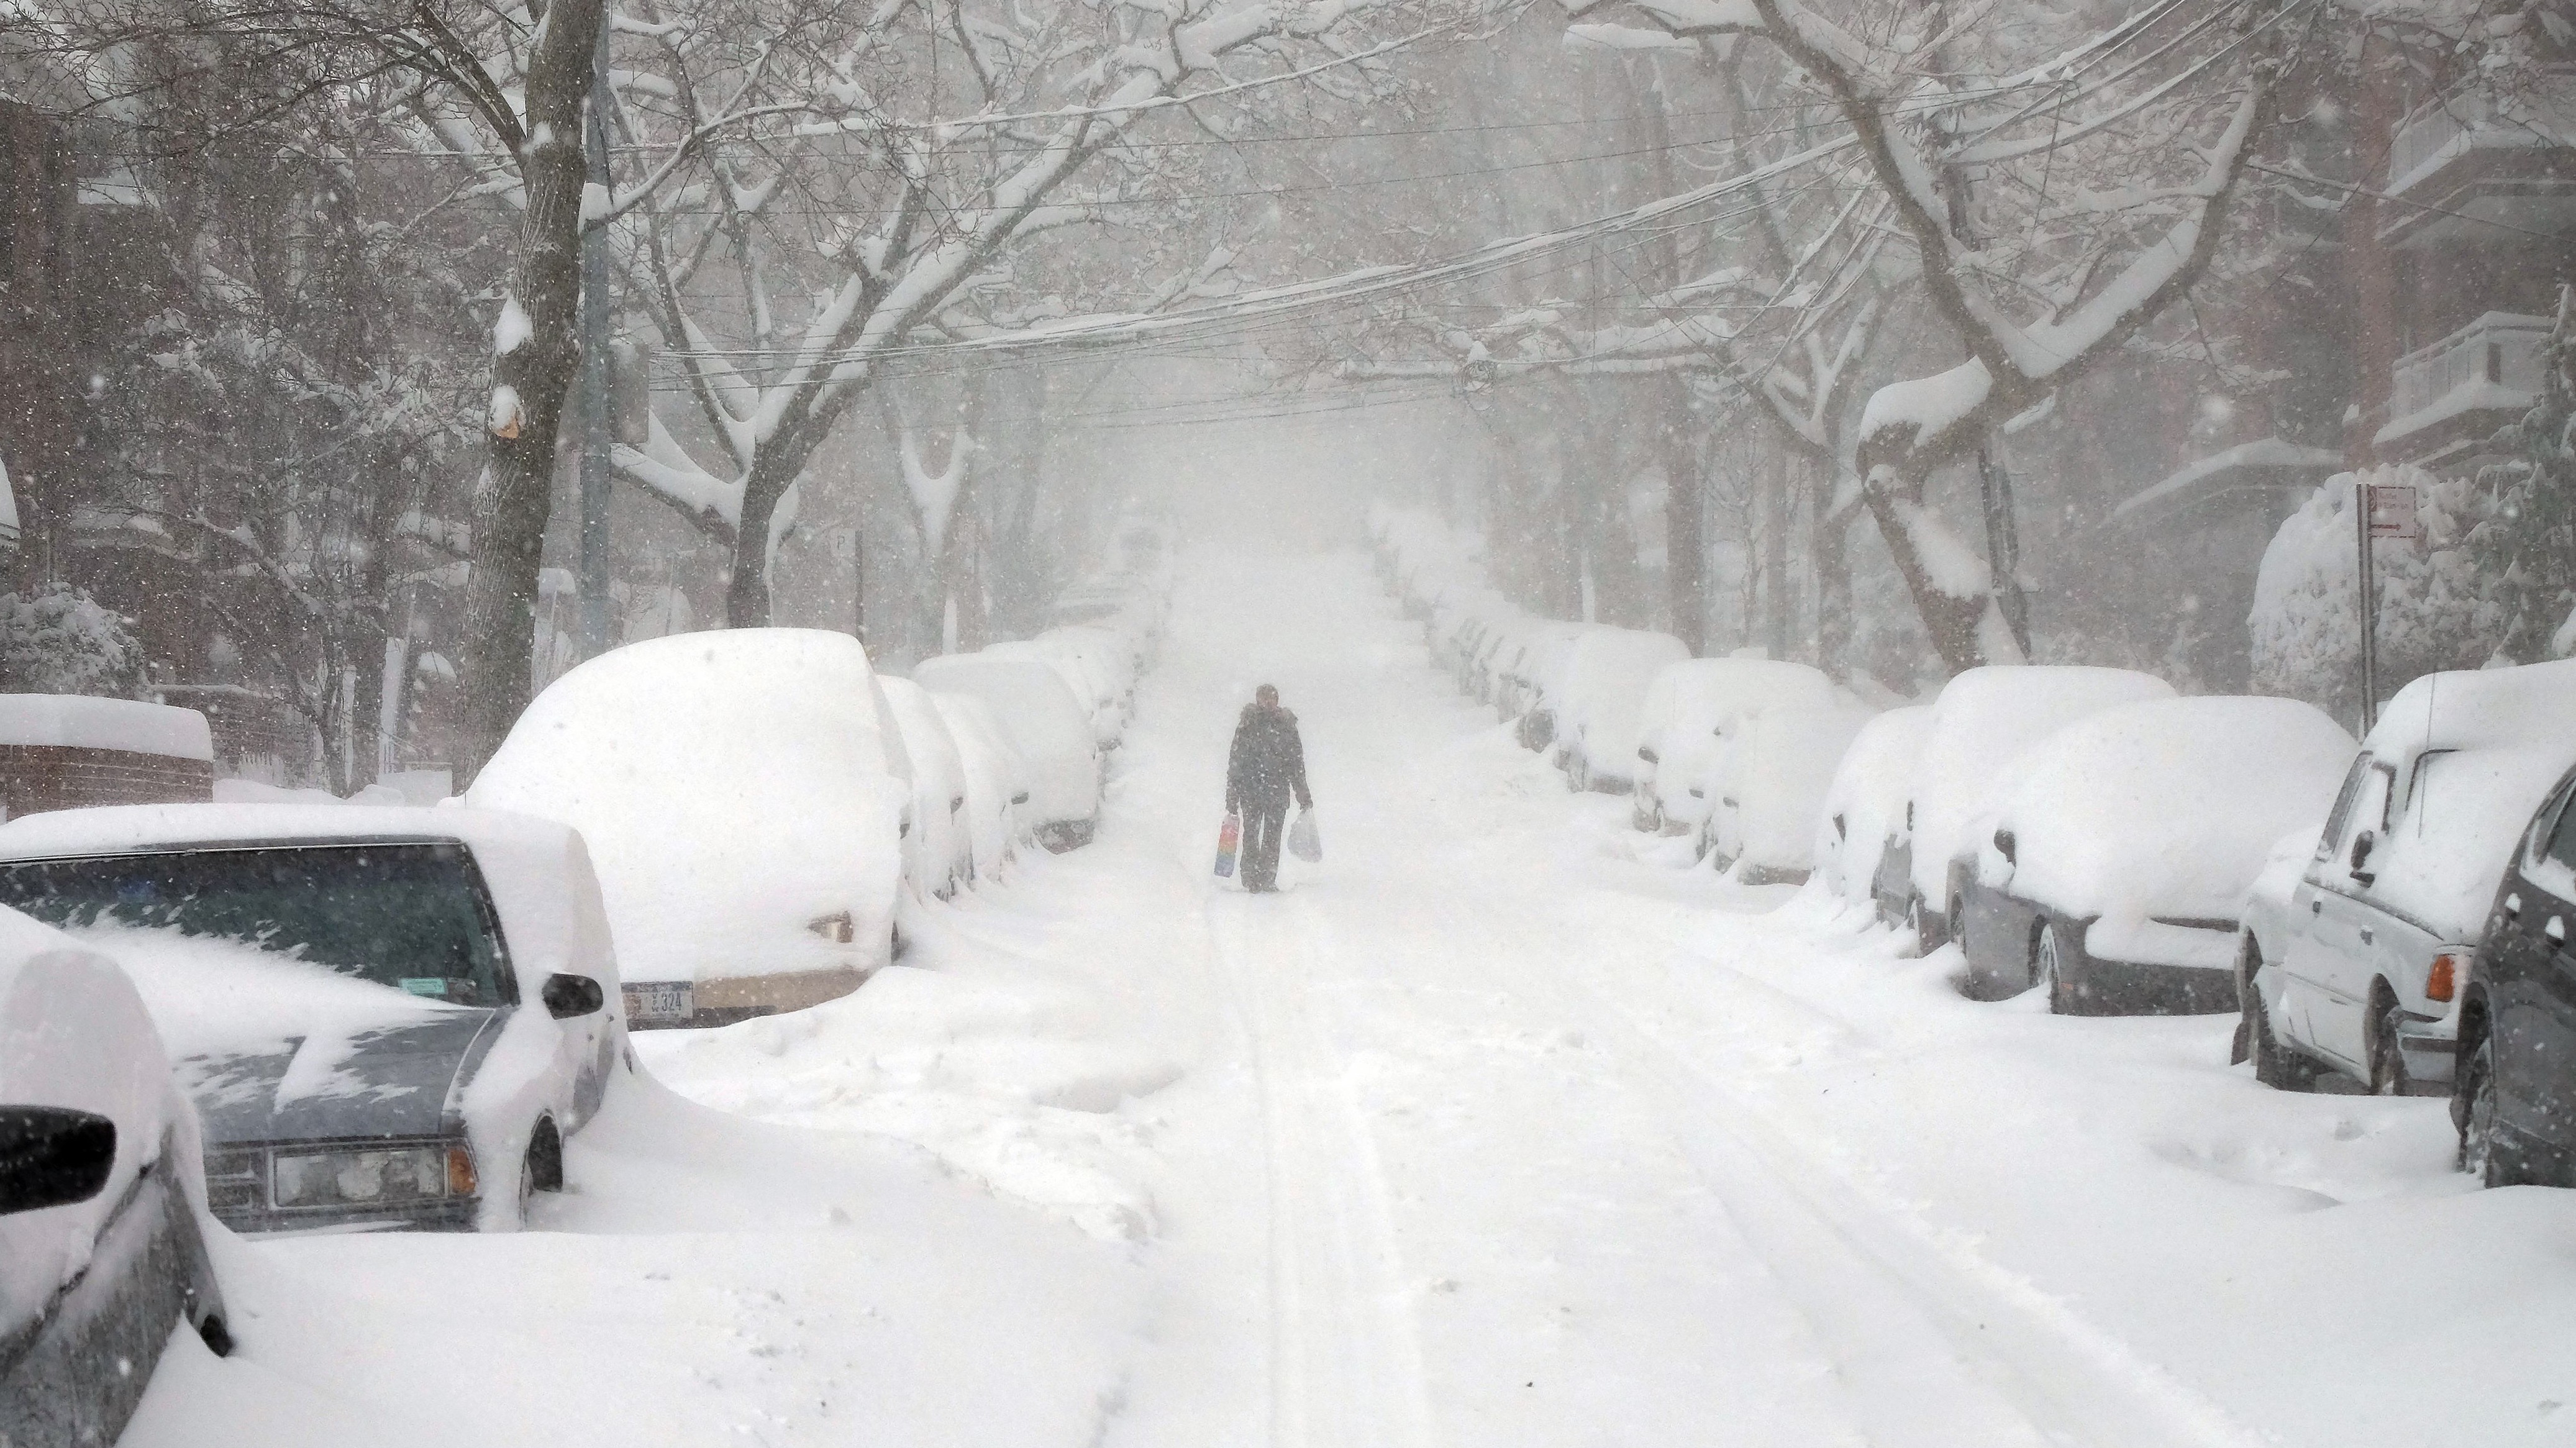 New York 2016 Blizzard Travel Ban When Does It Start & End?